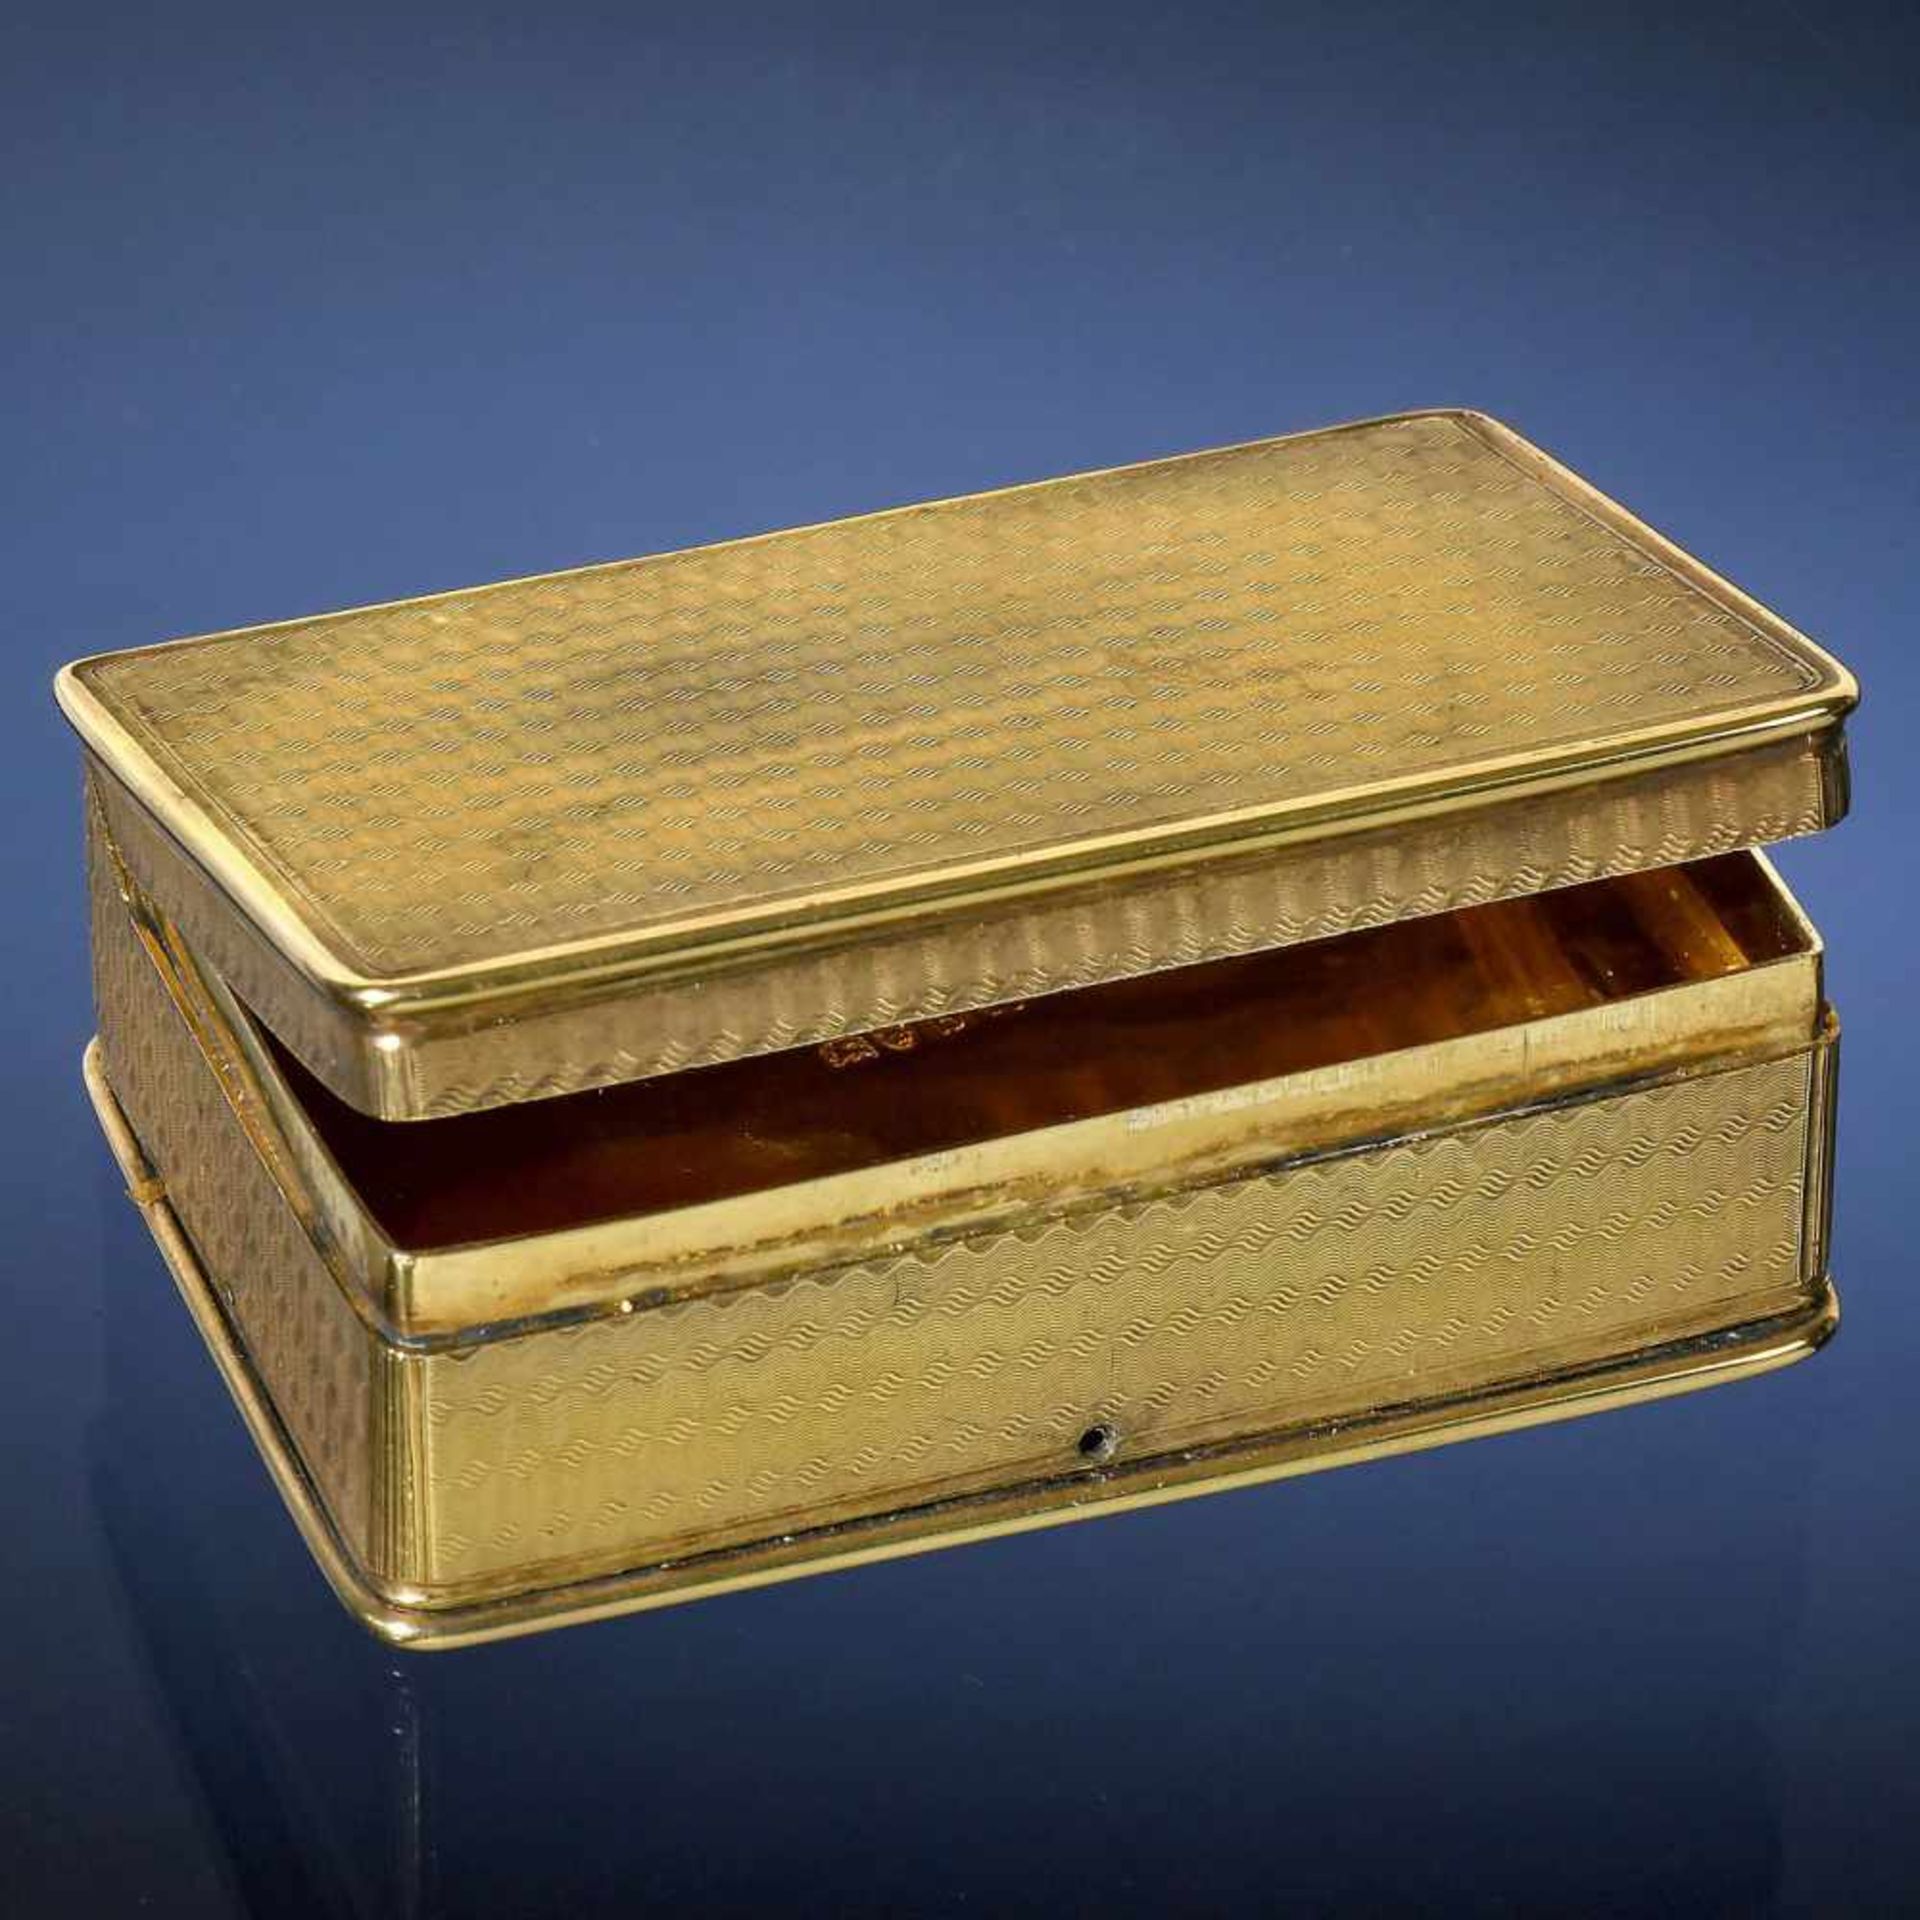 Rare Large Sur-Plateau Musical Snuff Box, 1817Playing two airs, with 50 individual teeth playing